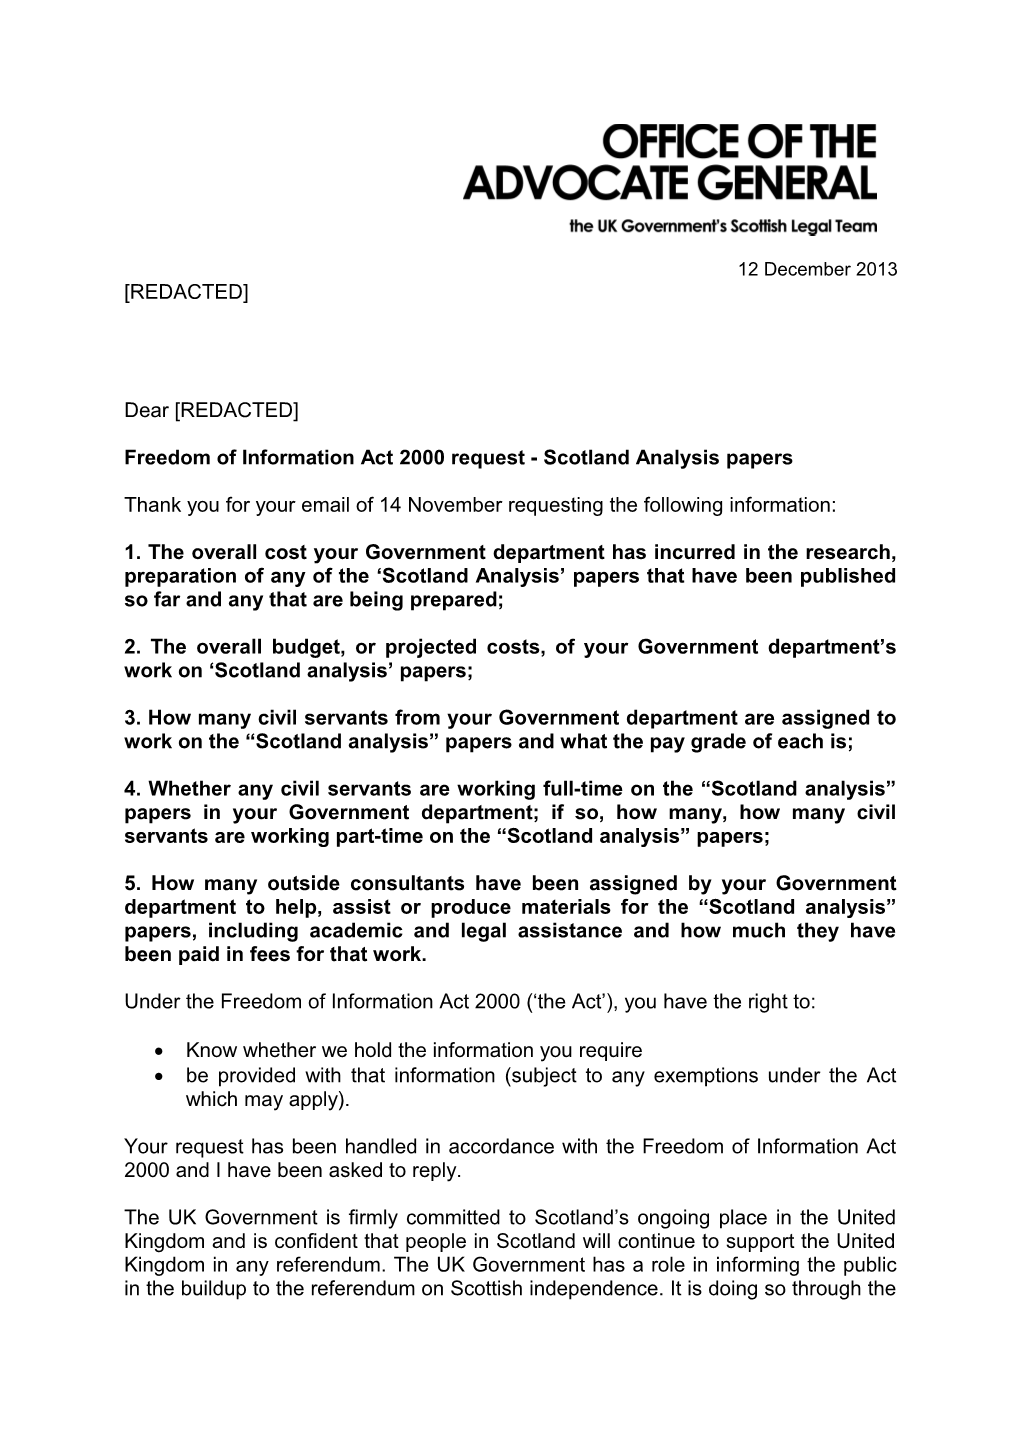 Freedom of Information Act 2000 Request - Scotland Analysis Papers